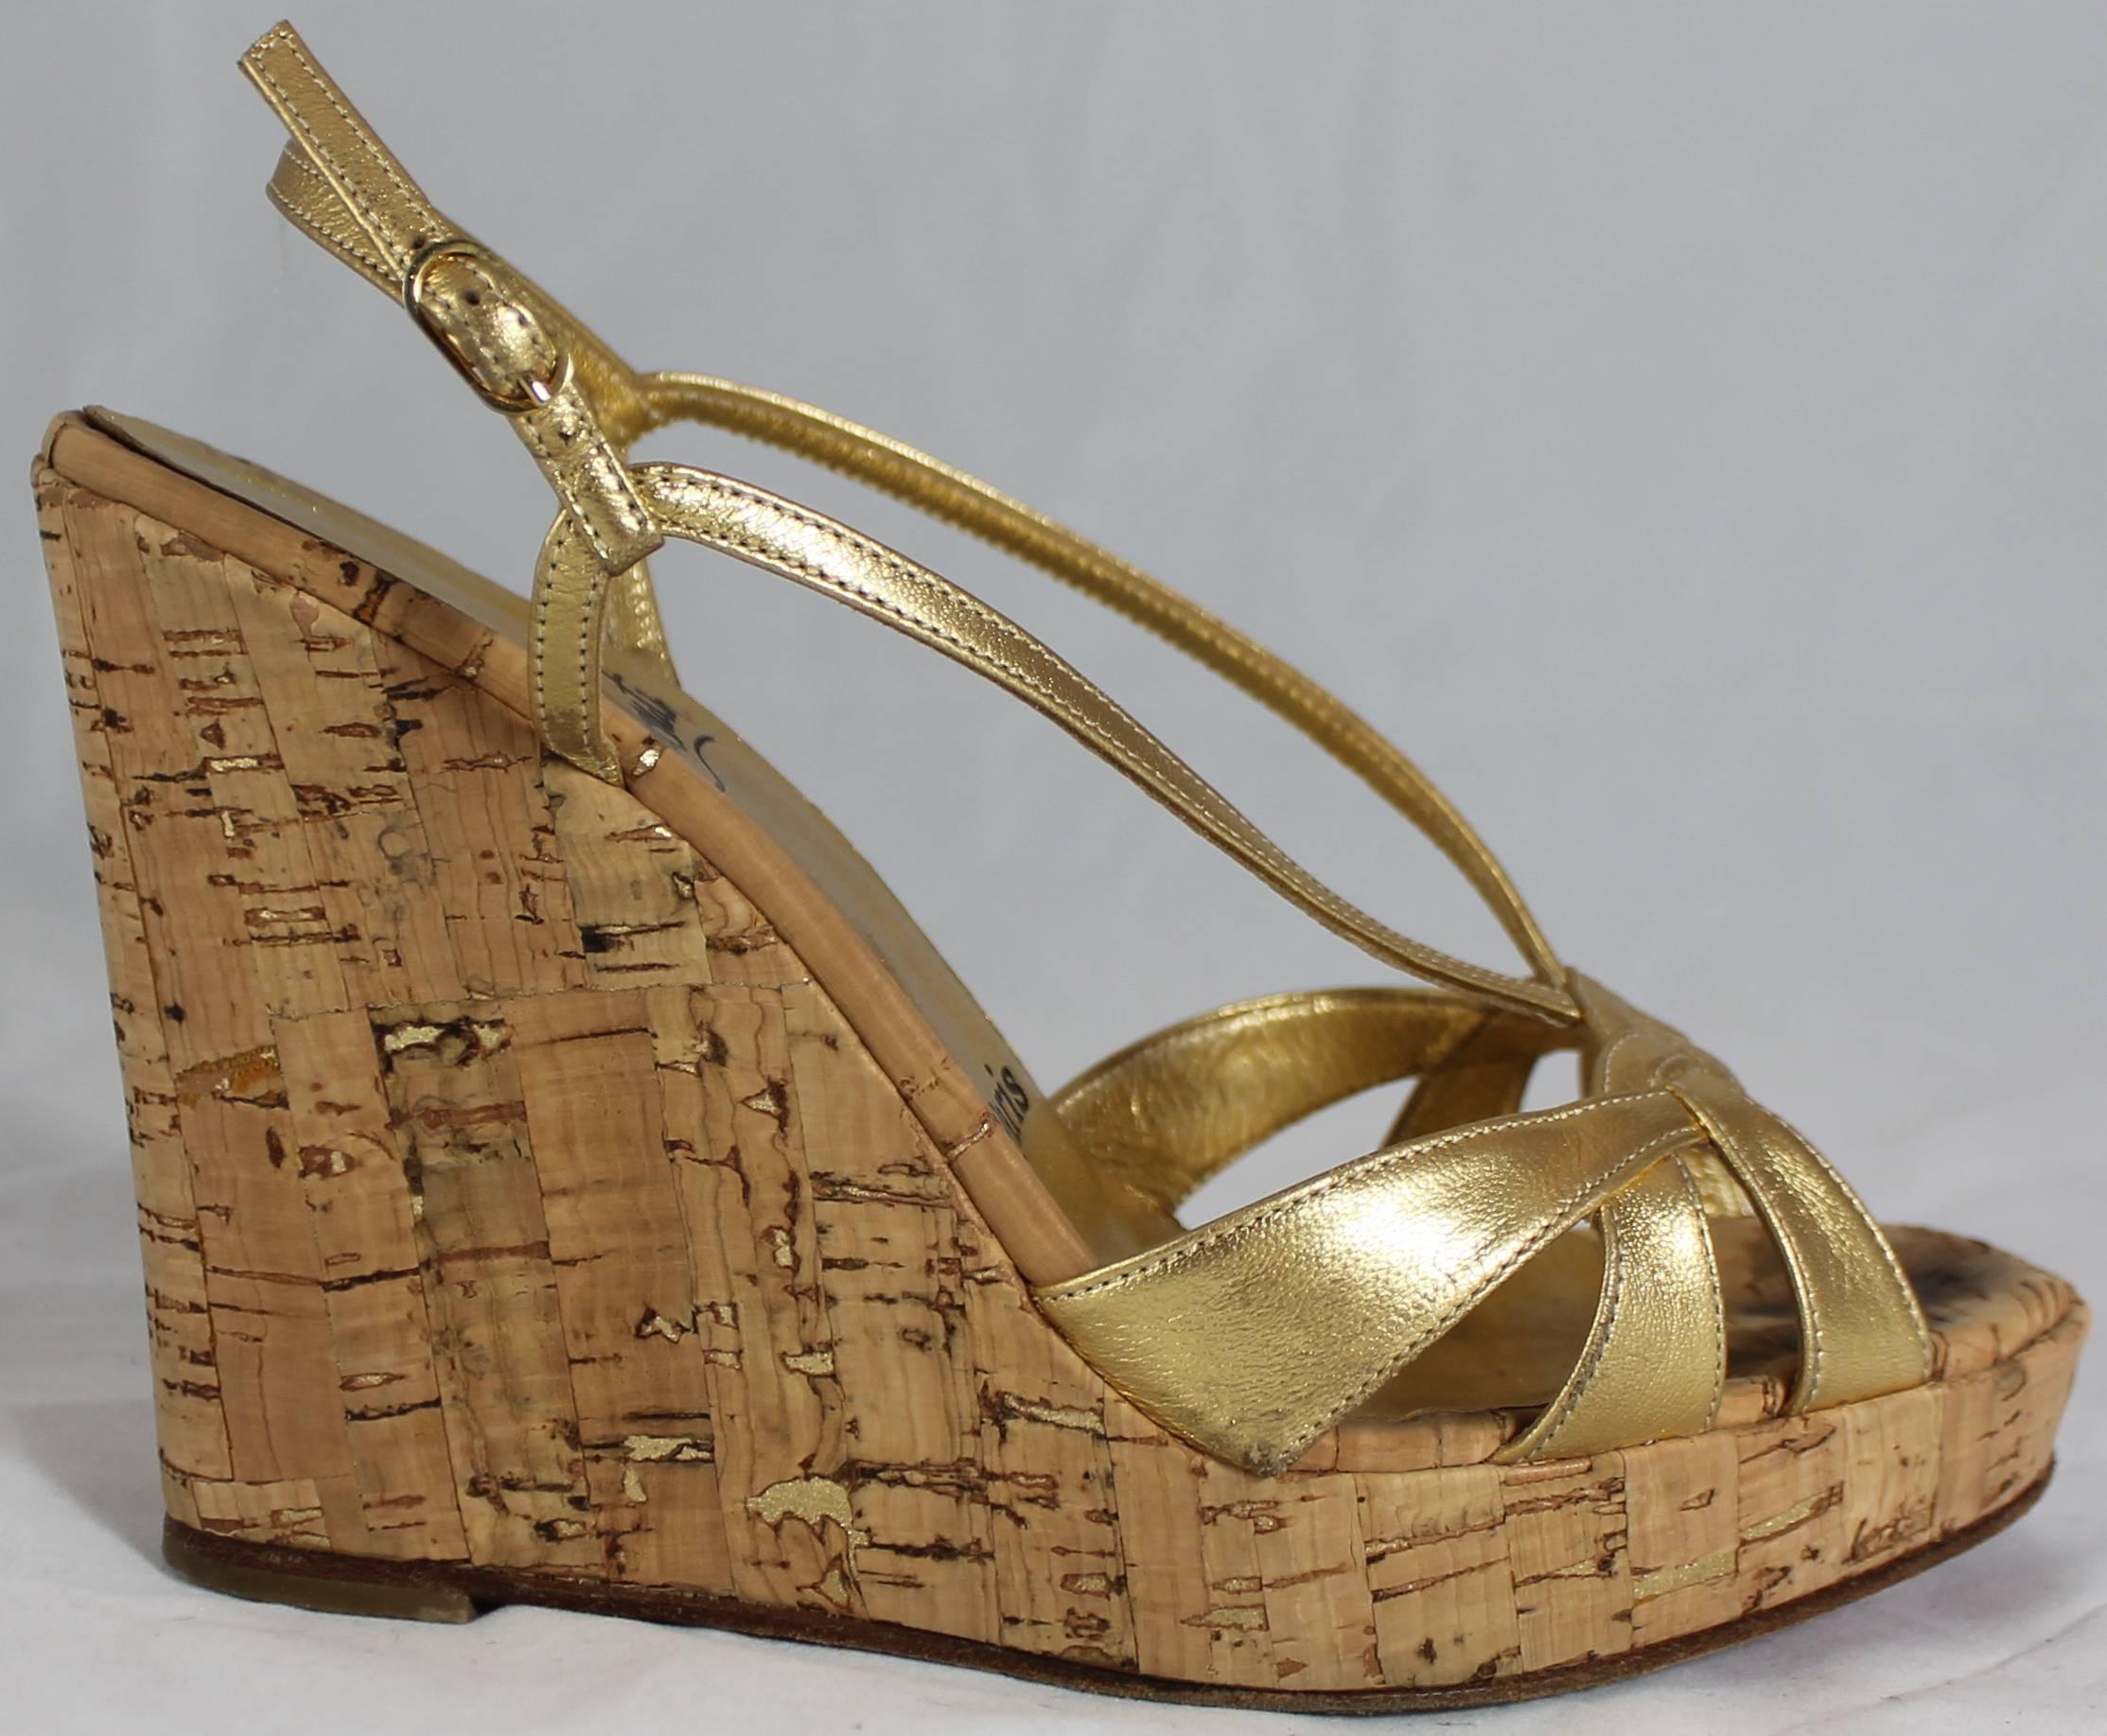 Christian Louboutin Gold Leather Strappy Cork Wedges - 36. These beautiful wedges have a strappy front in a metallic gold. The wedge is tan with gold flakes mixed in. They are in very good condition with some bottom wear and minor dirt marks on the